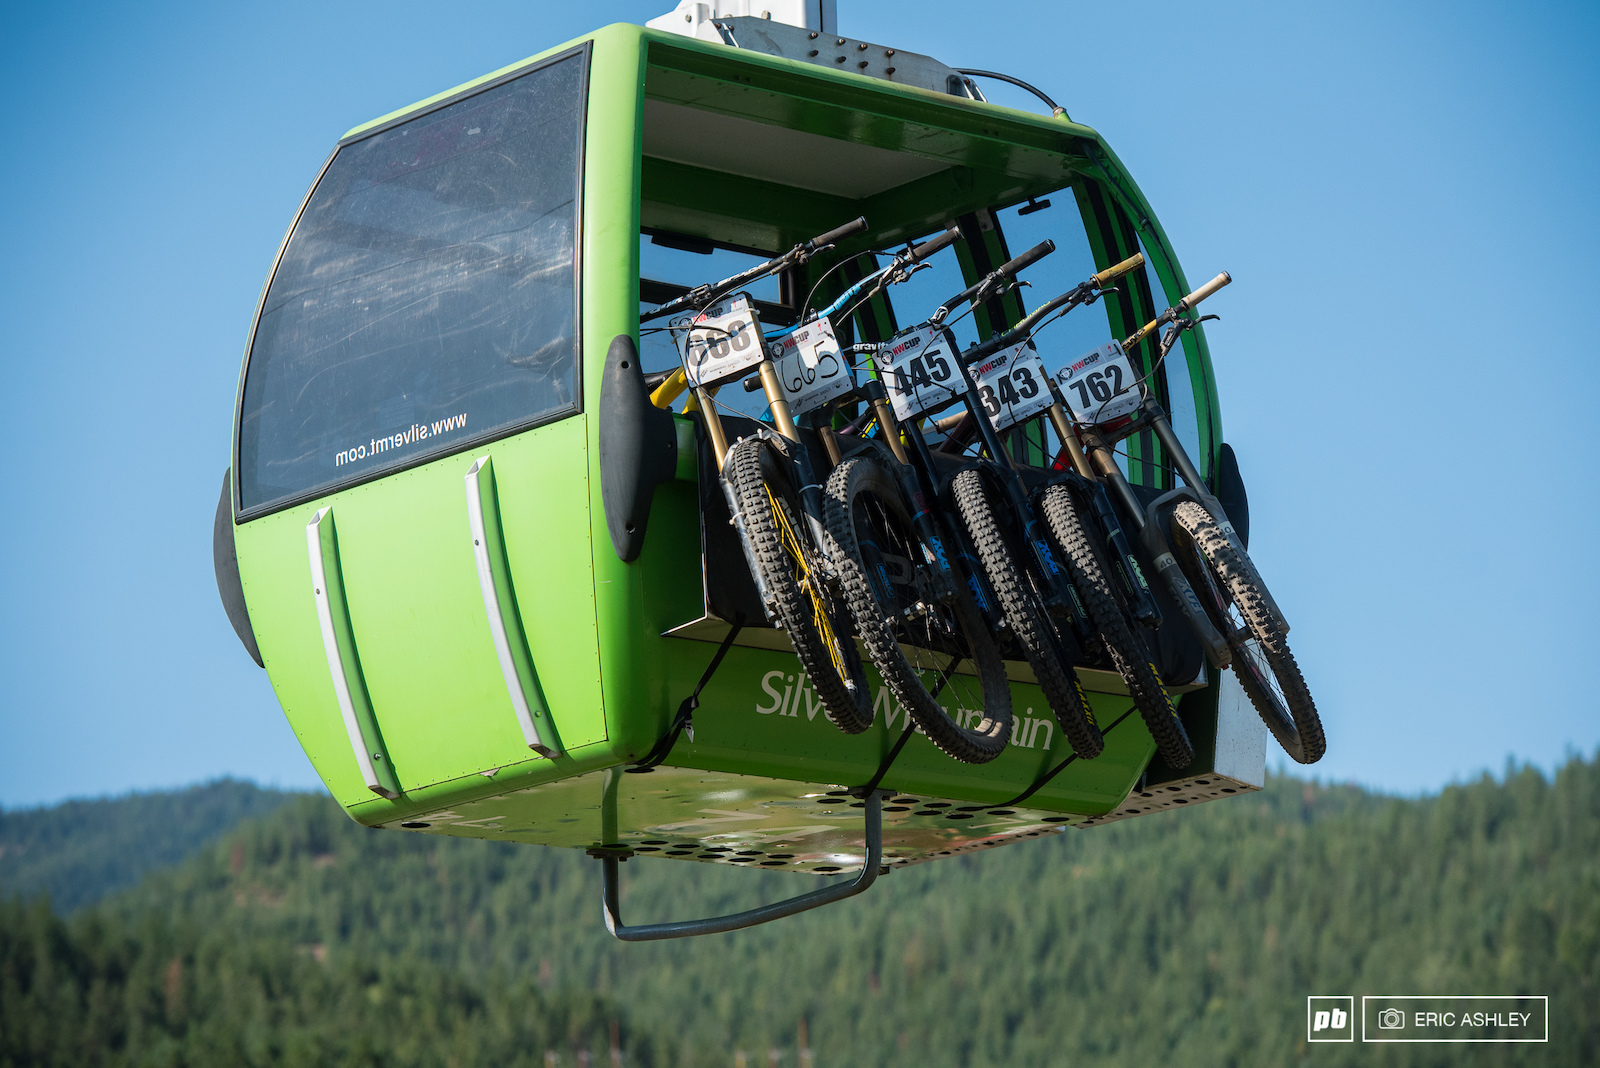 Tailgate pads and gondolas makes for an efficient up lift from the village.